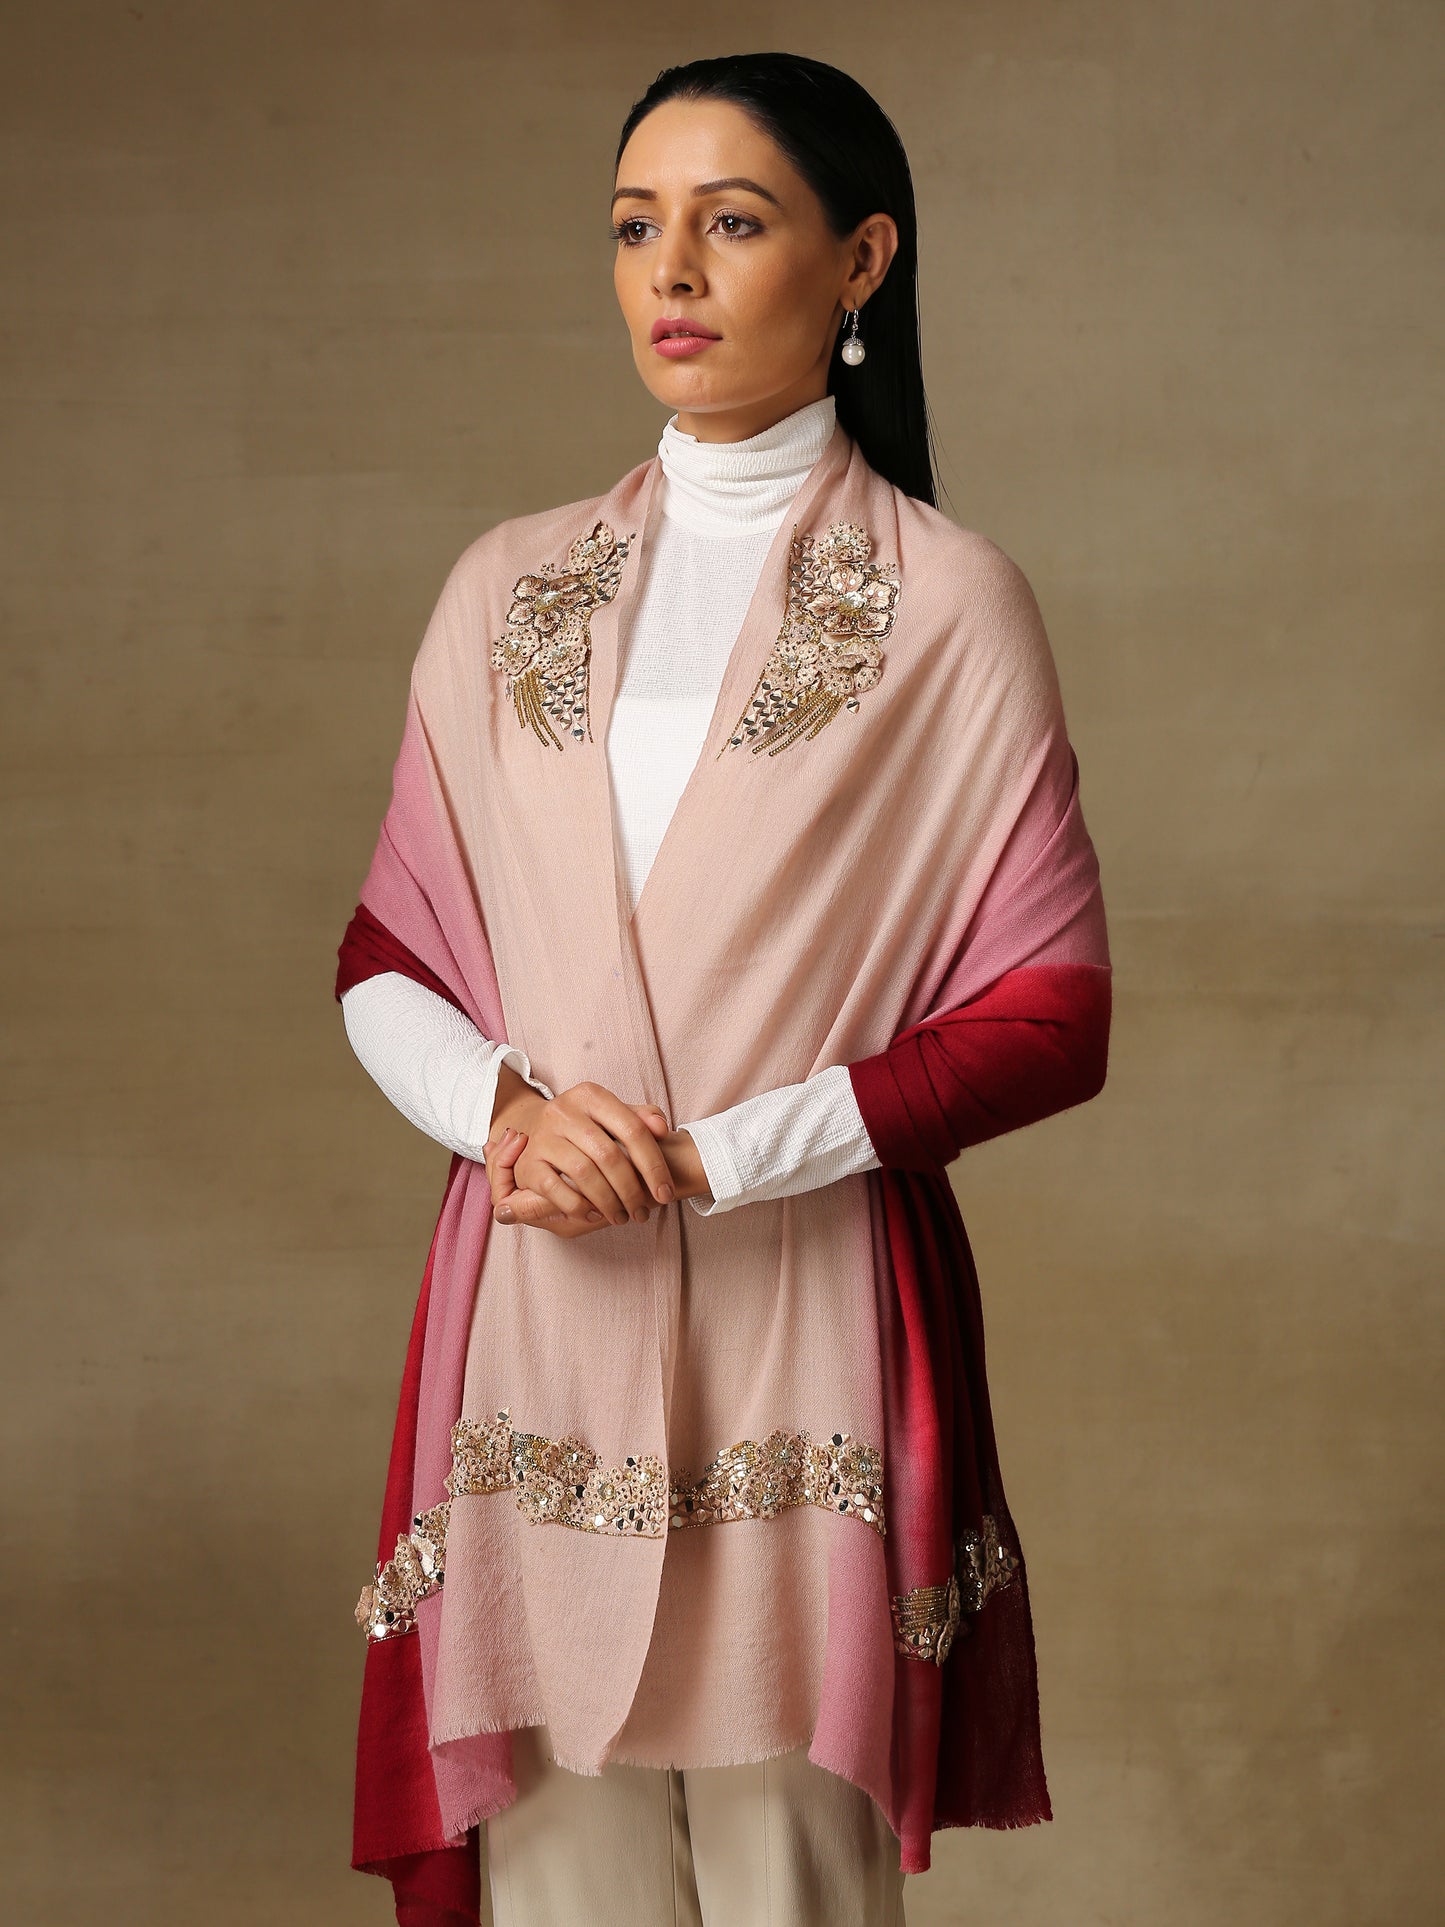 Model is wearing Enchanted pashmina stole from Shaza hand painted in a pink and wine ombre colour, featuring delicate threadwork motifs uplifted with mirrorwork, shellwork, swarovski and cutdana.